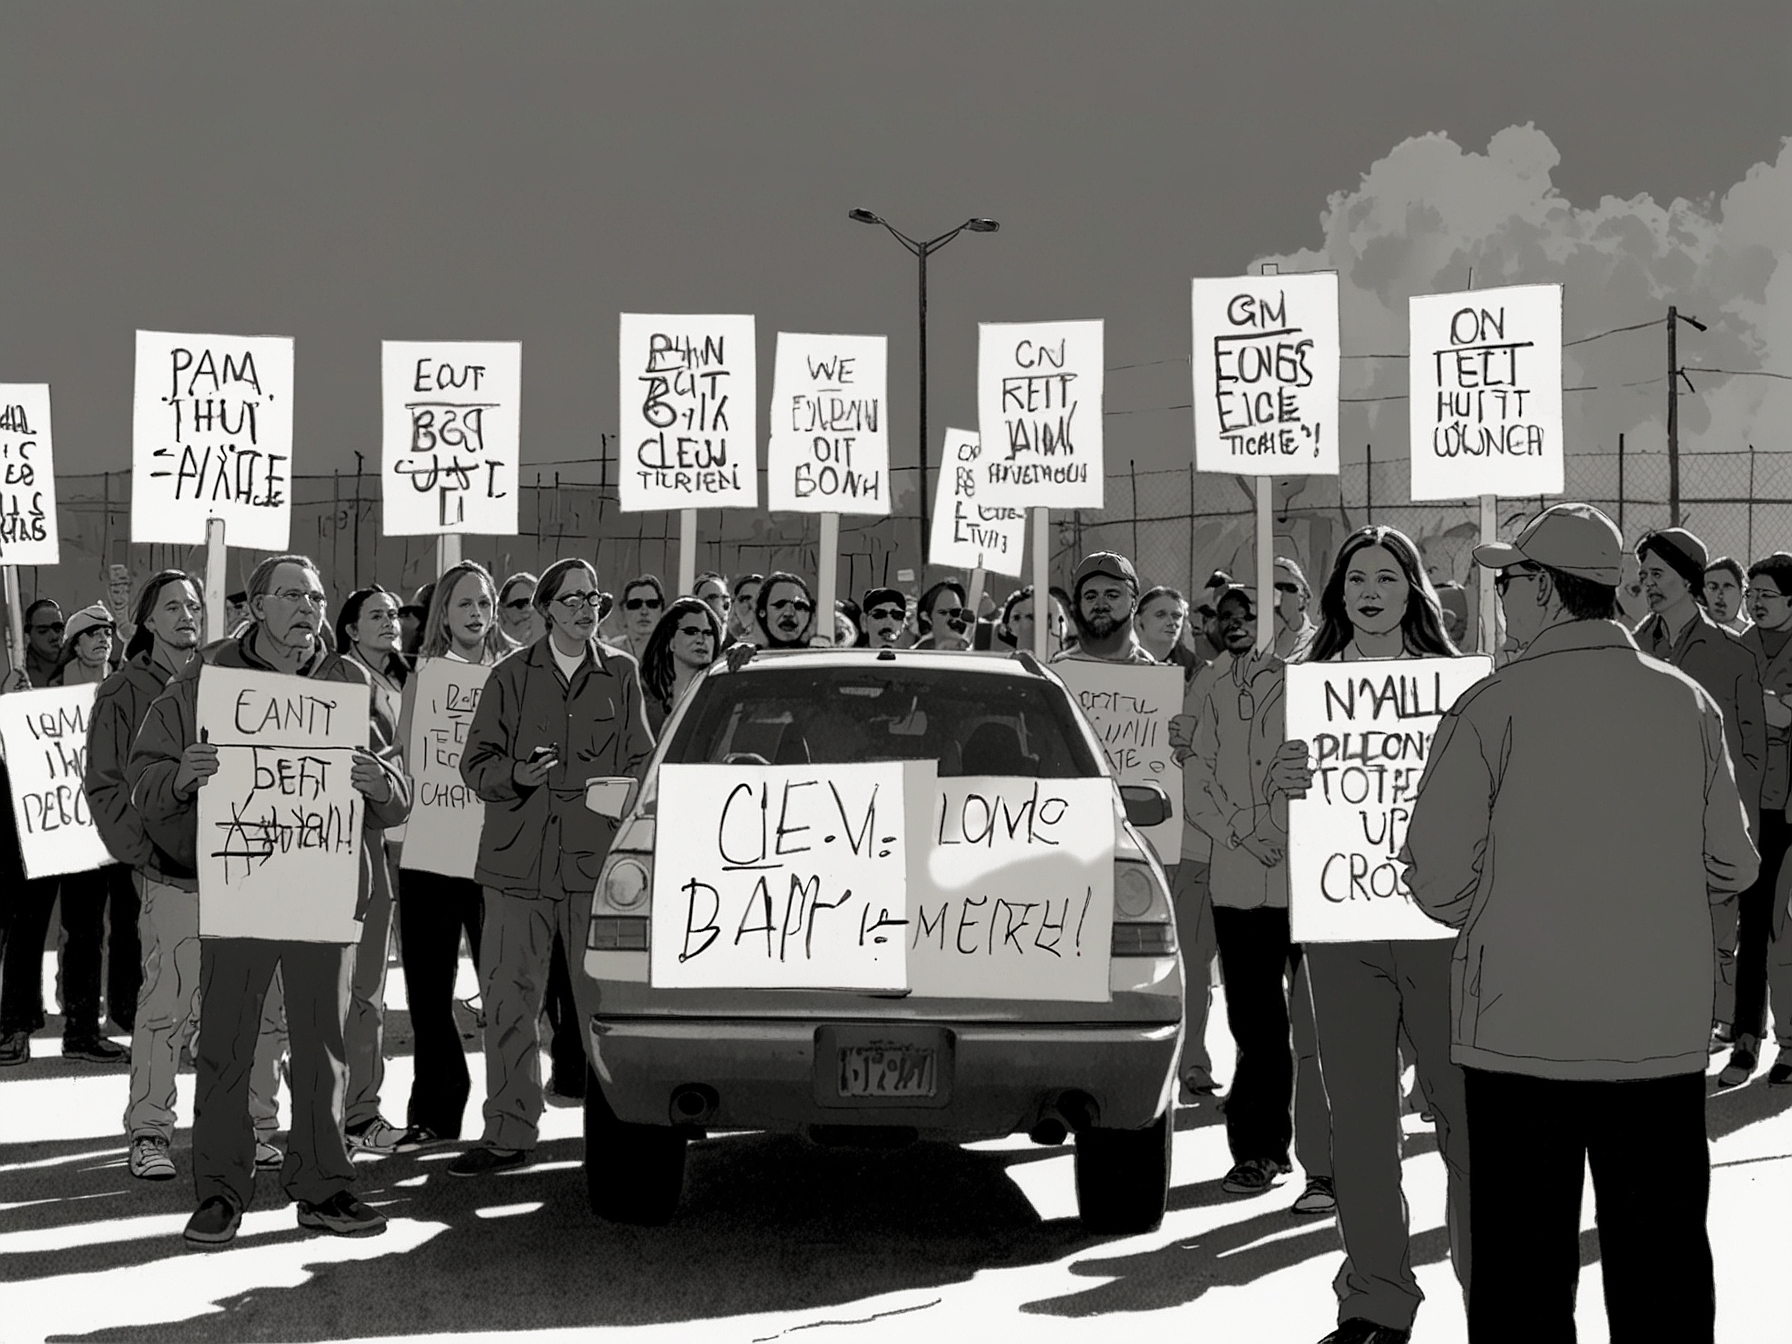 Protesters holding signs rally outside a GM storage lot in 2002, expressing their frustration over the discontinuation of the EV1. The passionate crowd underscores the emotional connection and dedication of early EV1 adopters.